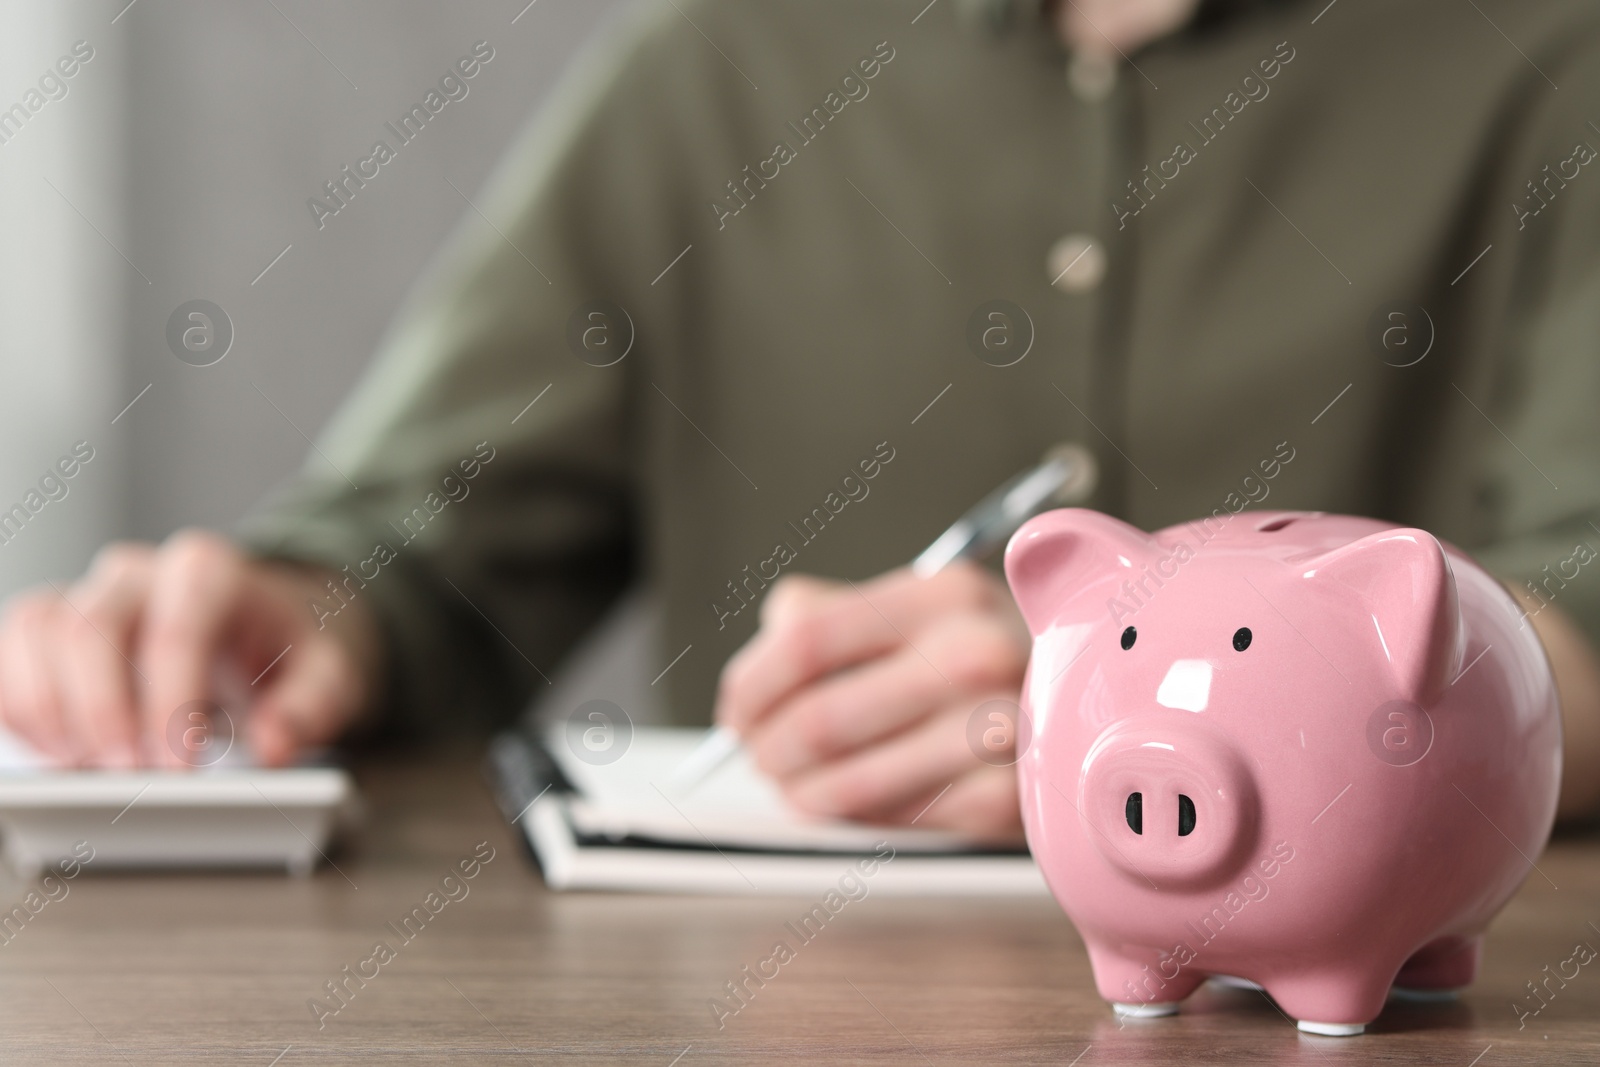 Photo of Financial savings. Man writing down notes and using calculator at wooden table, focus on piggy bank